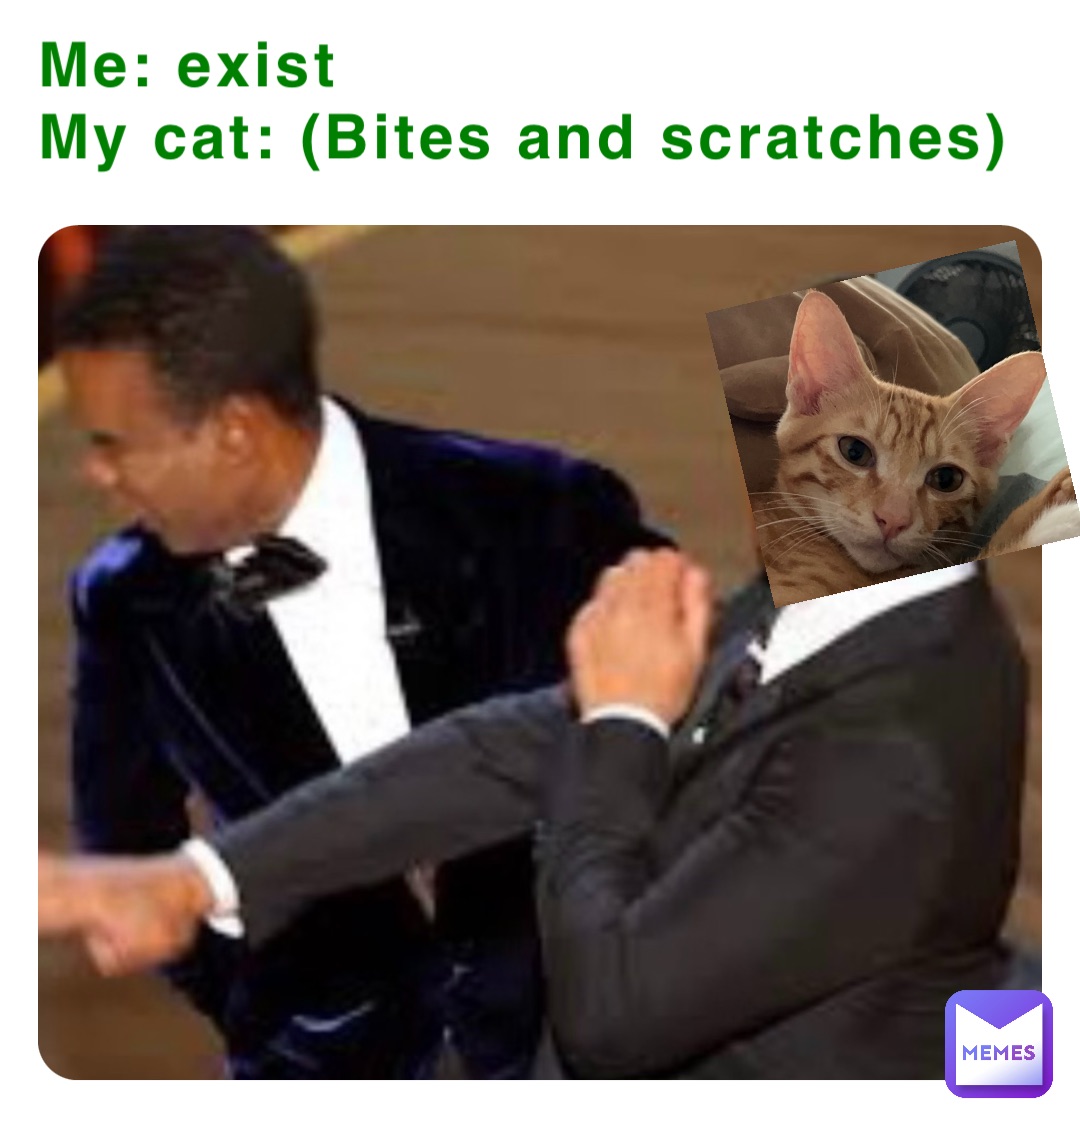 Me: exist
My cat: (Bites and scratches)